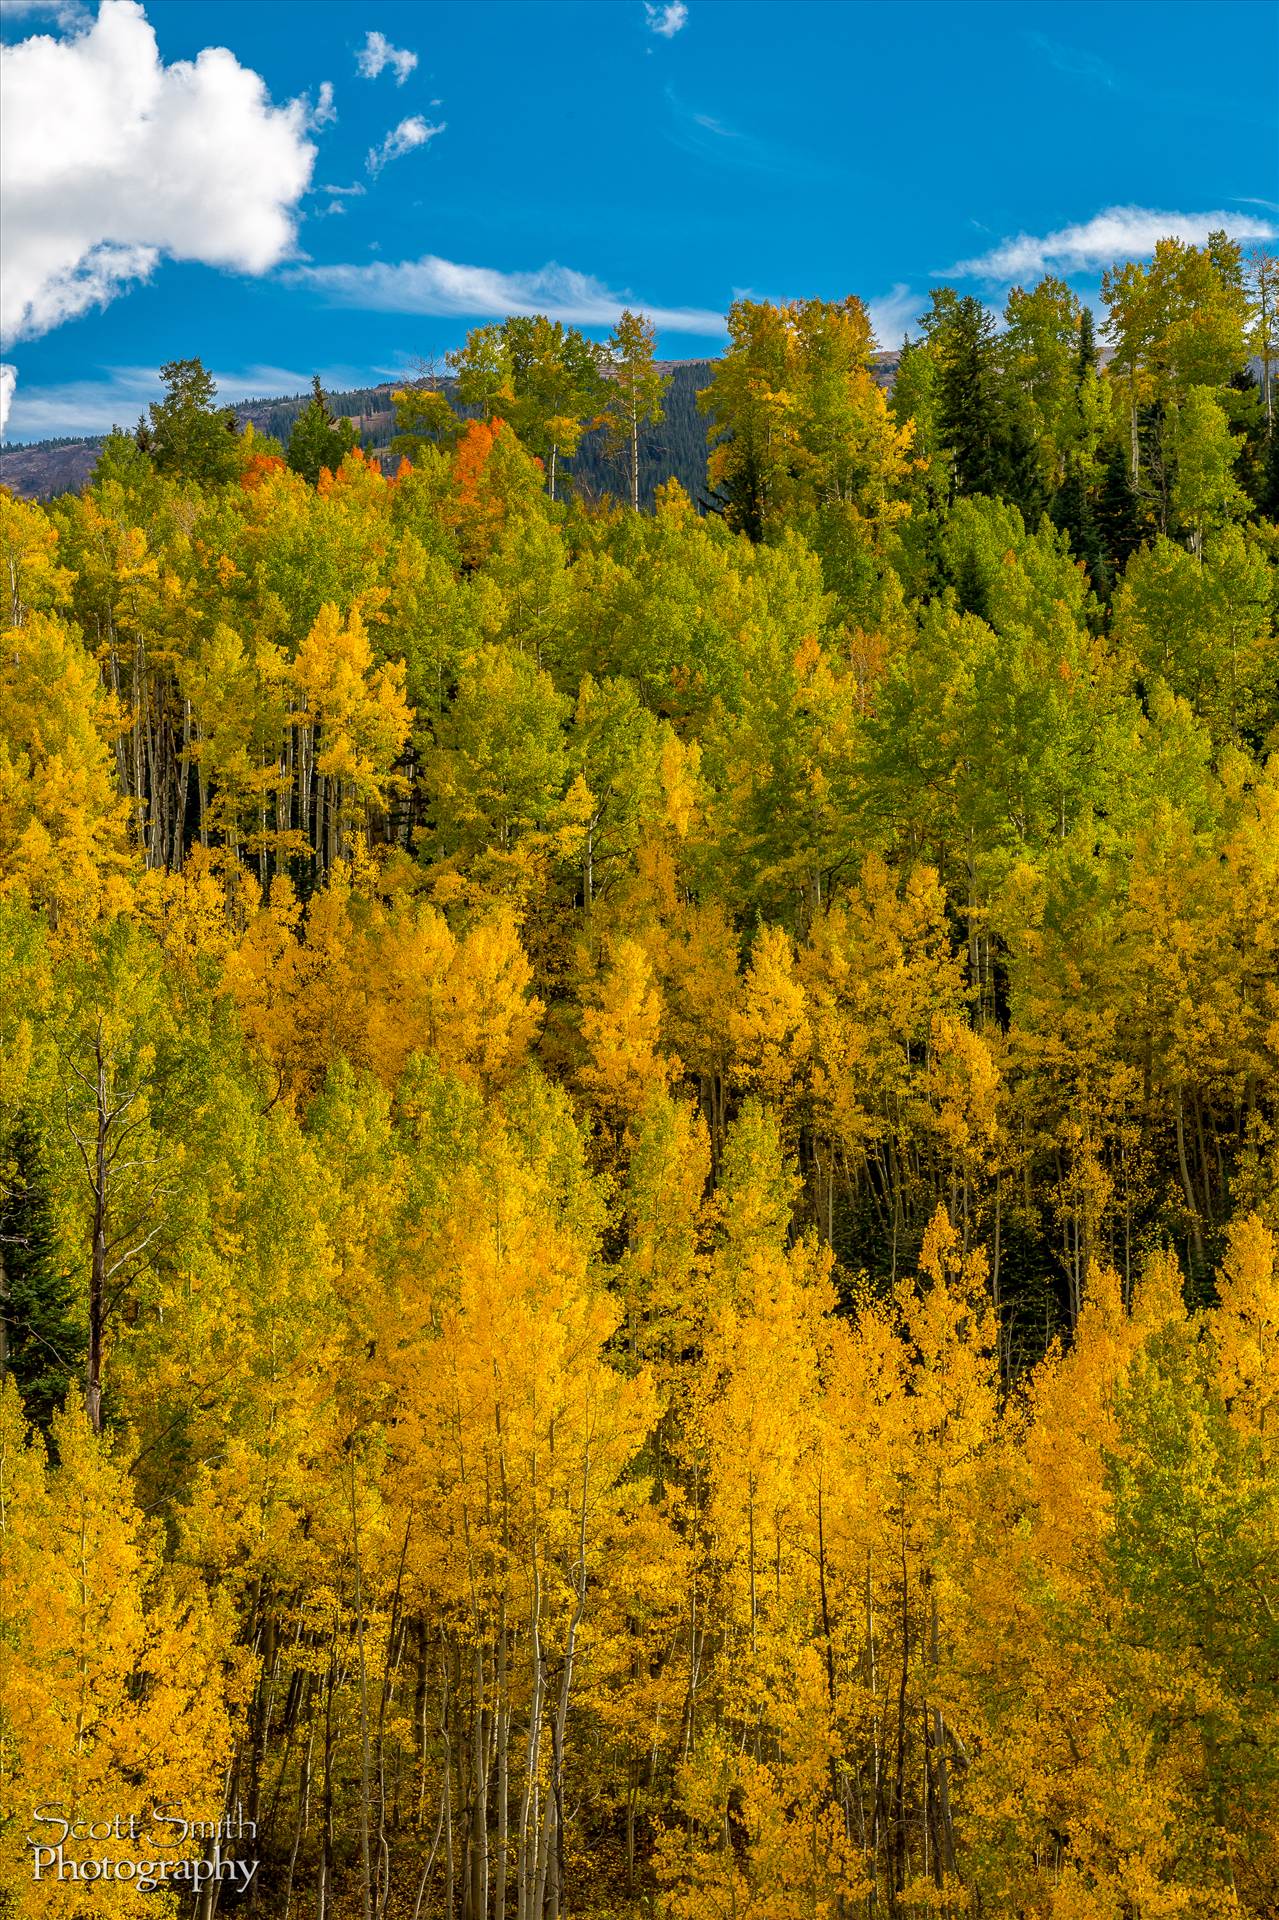 Snowmass Wilderness Area Fall Colors - Fall colors in Colorado, just outside of Snowmass Village by Scott Smith Photos